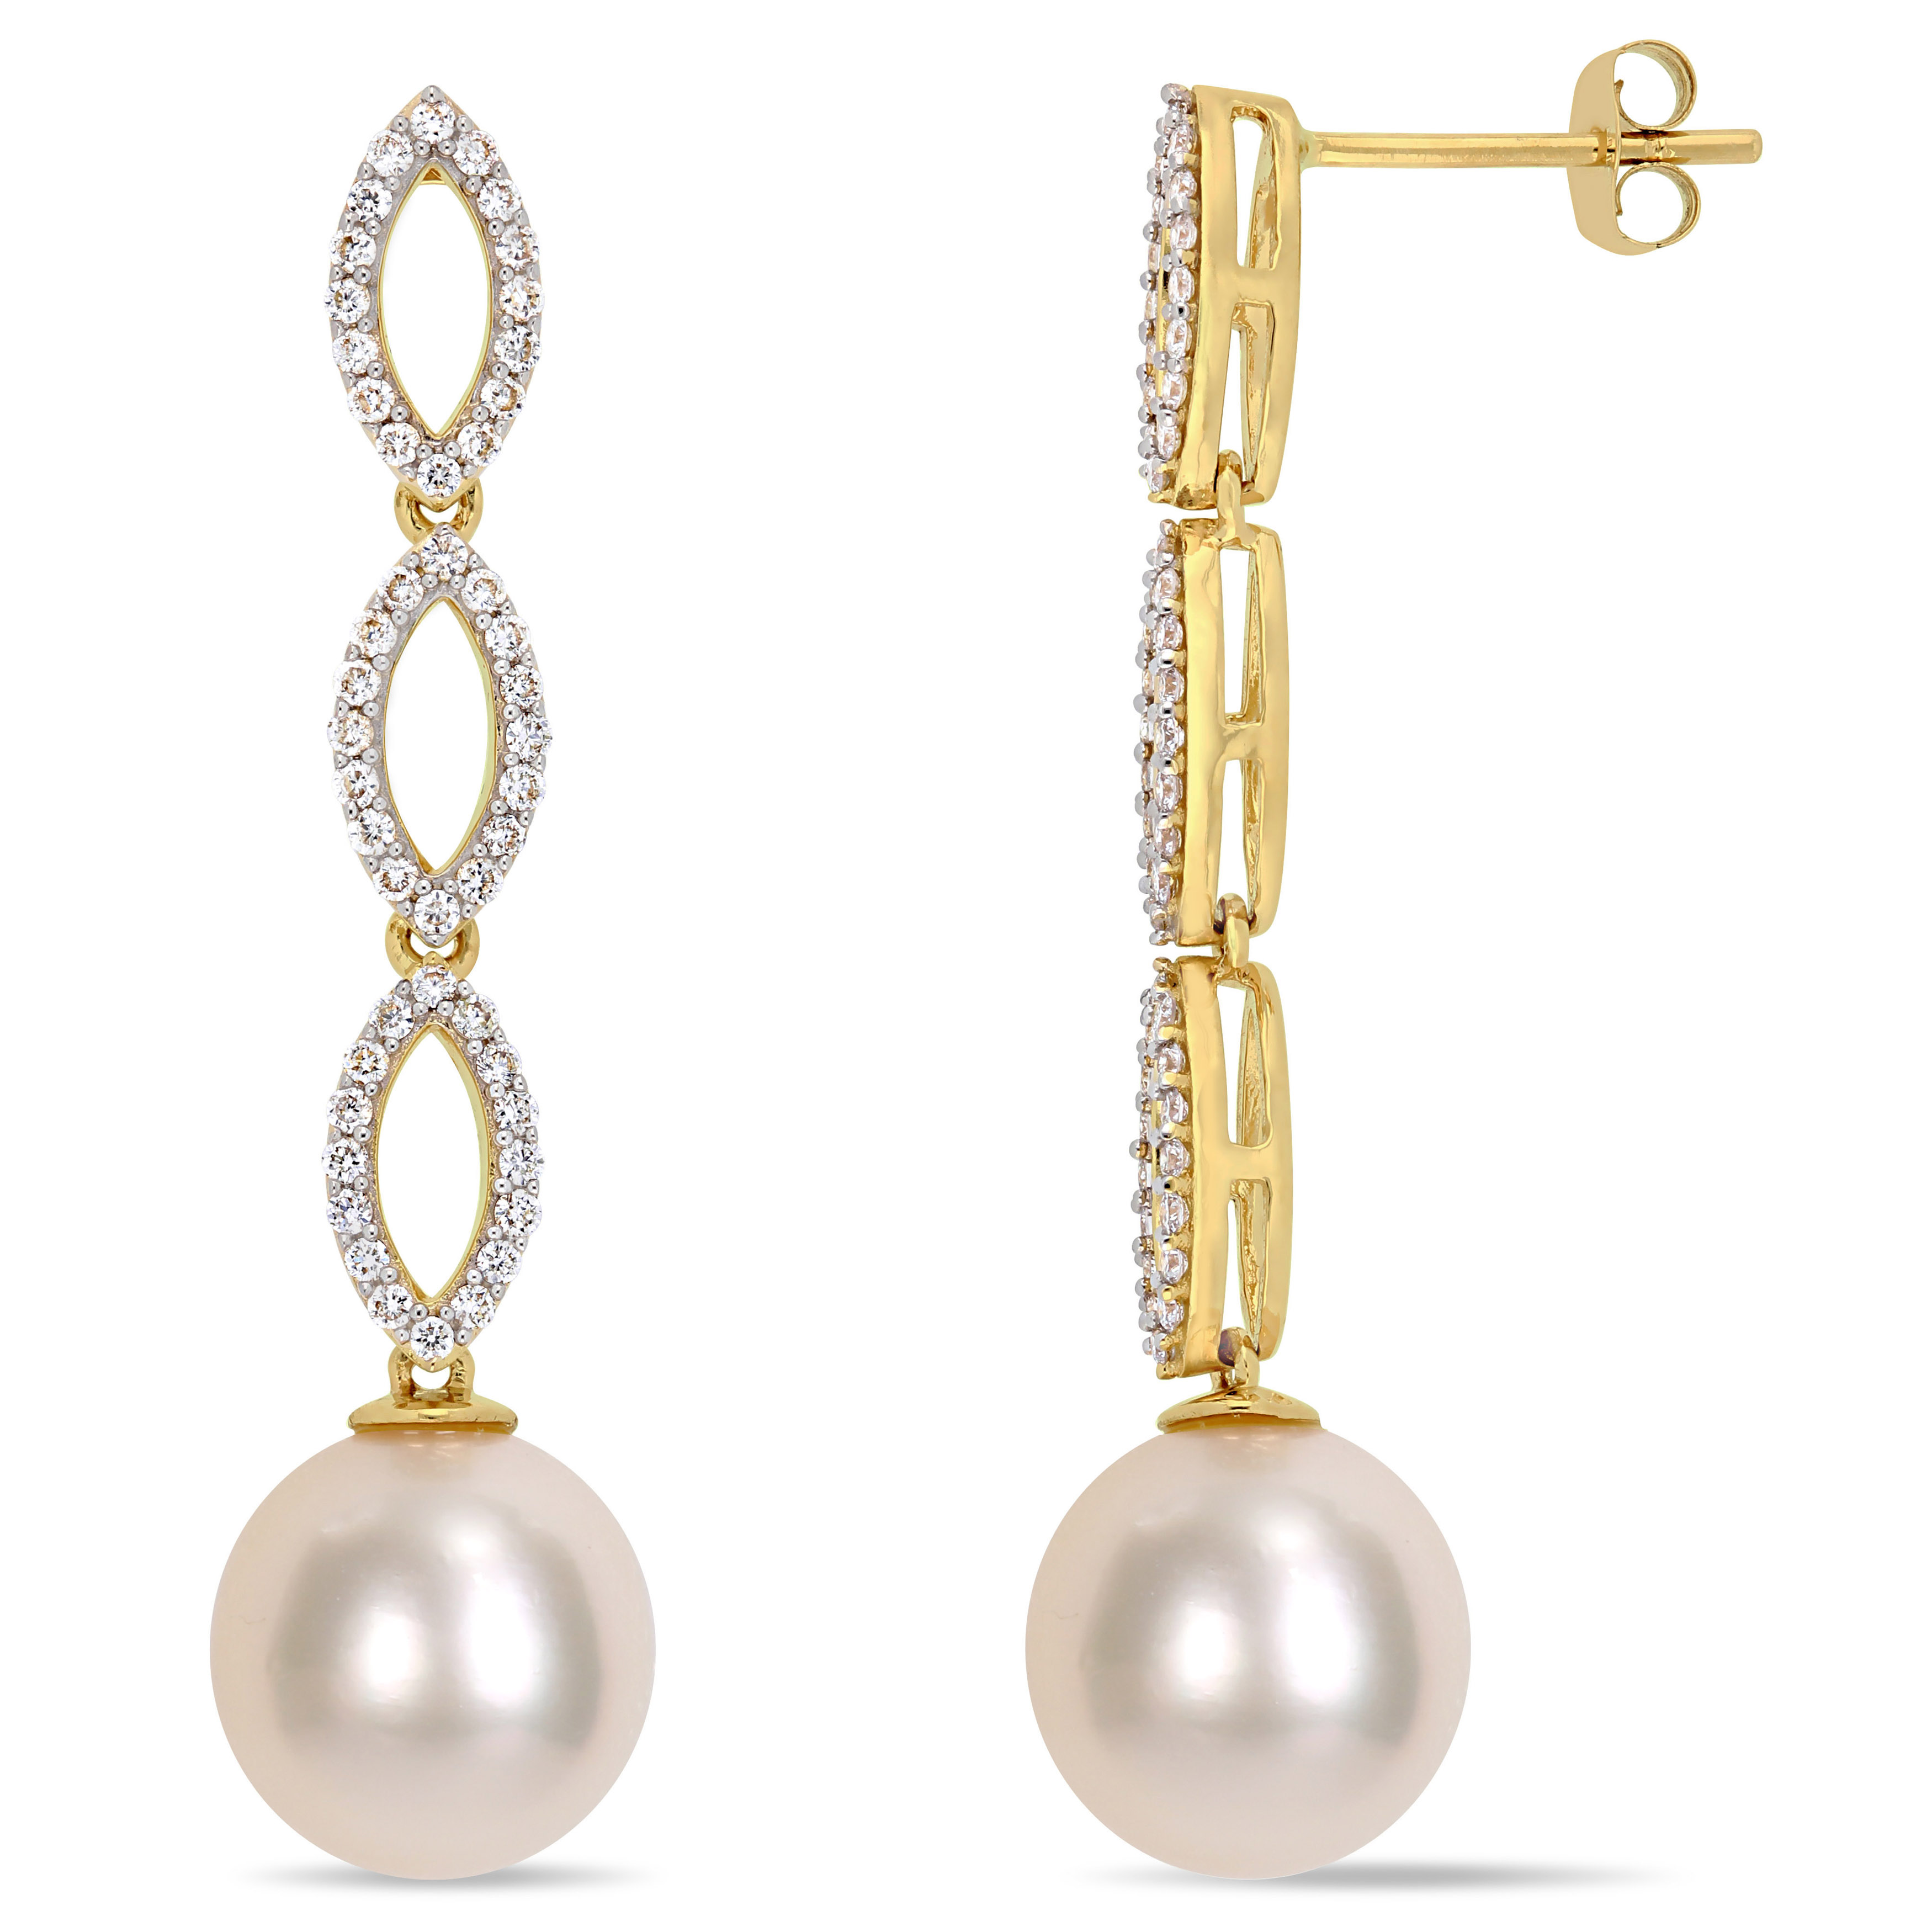 10 - 10.5 MM South Sea Cultured Pearl and 1/2 CT TW Diamond Infinity Dangle Post Earrings in 14k Yellow Gold